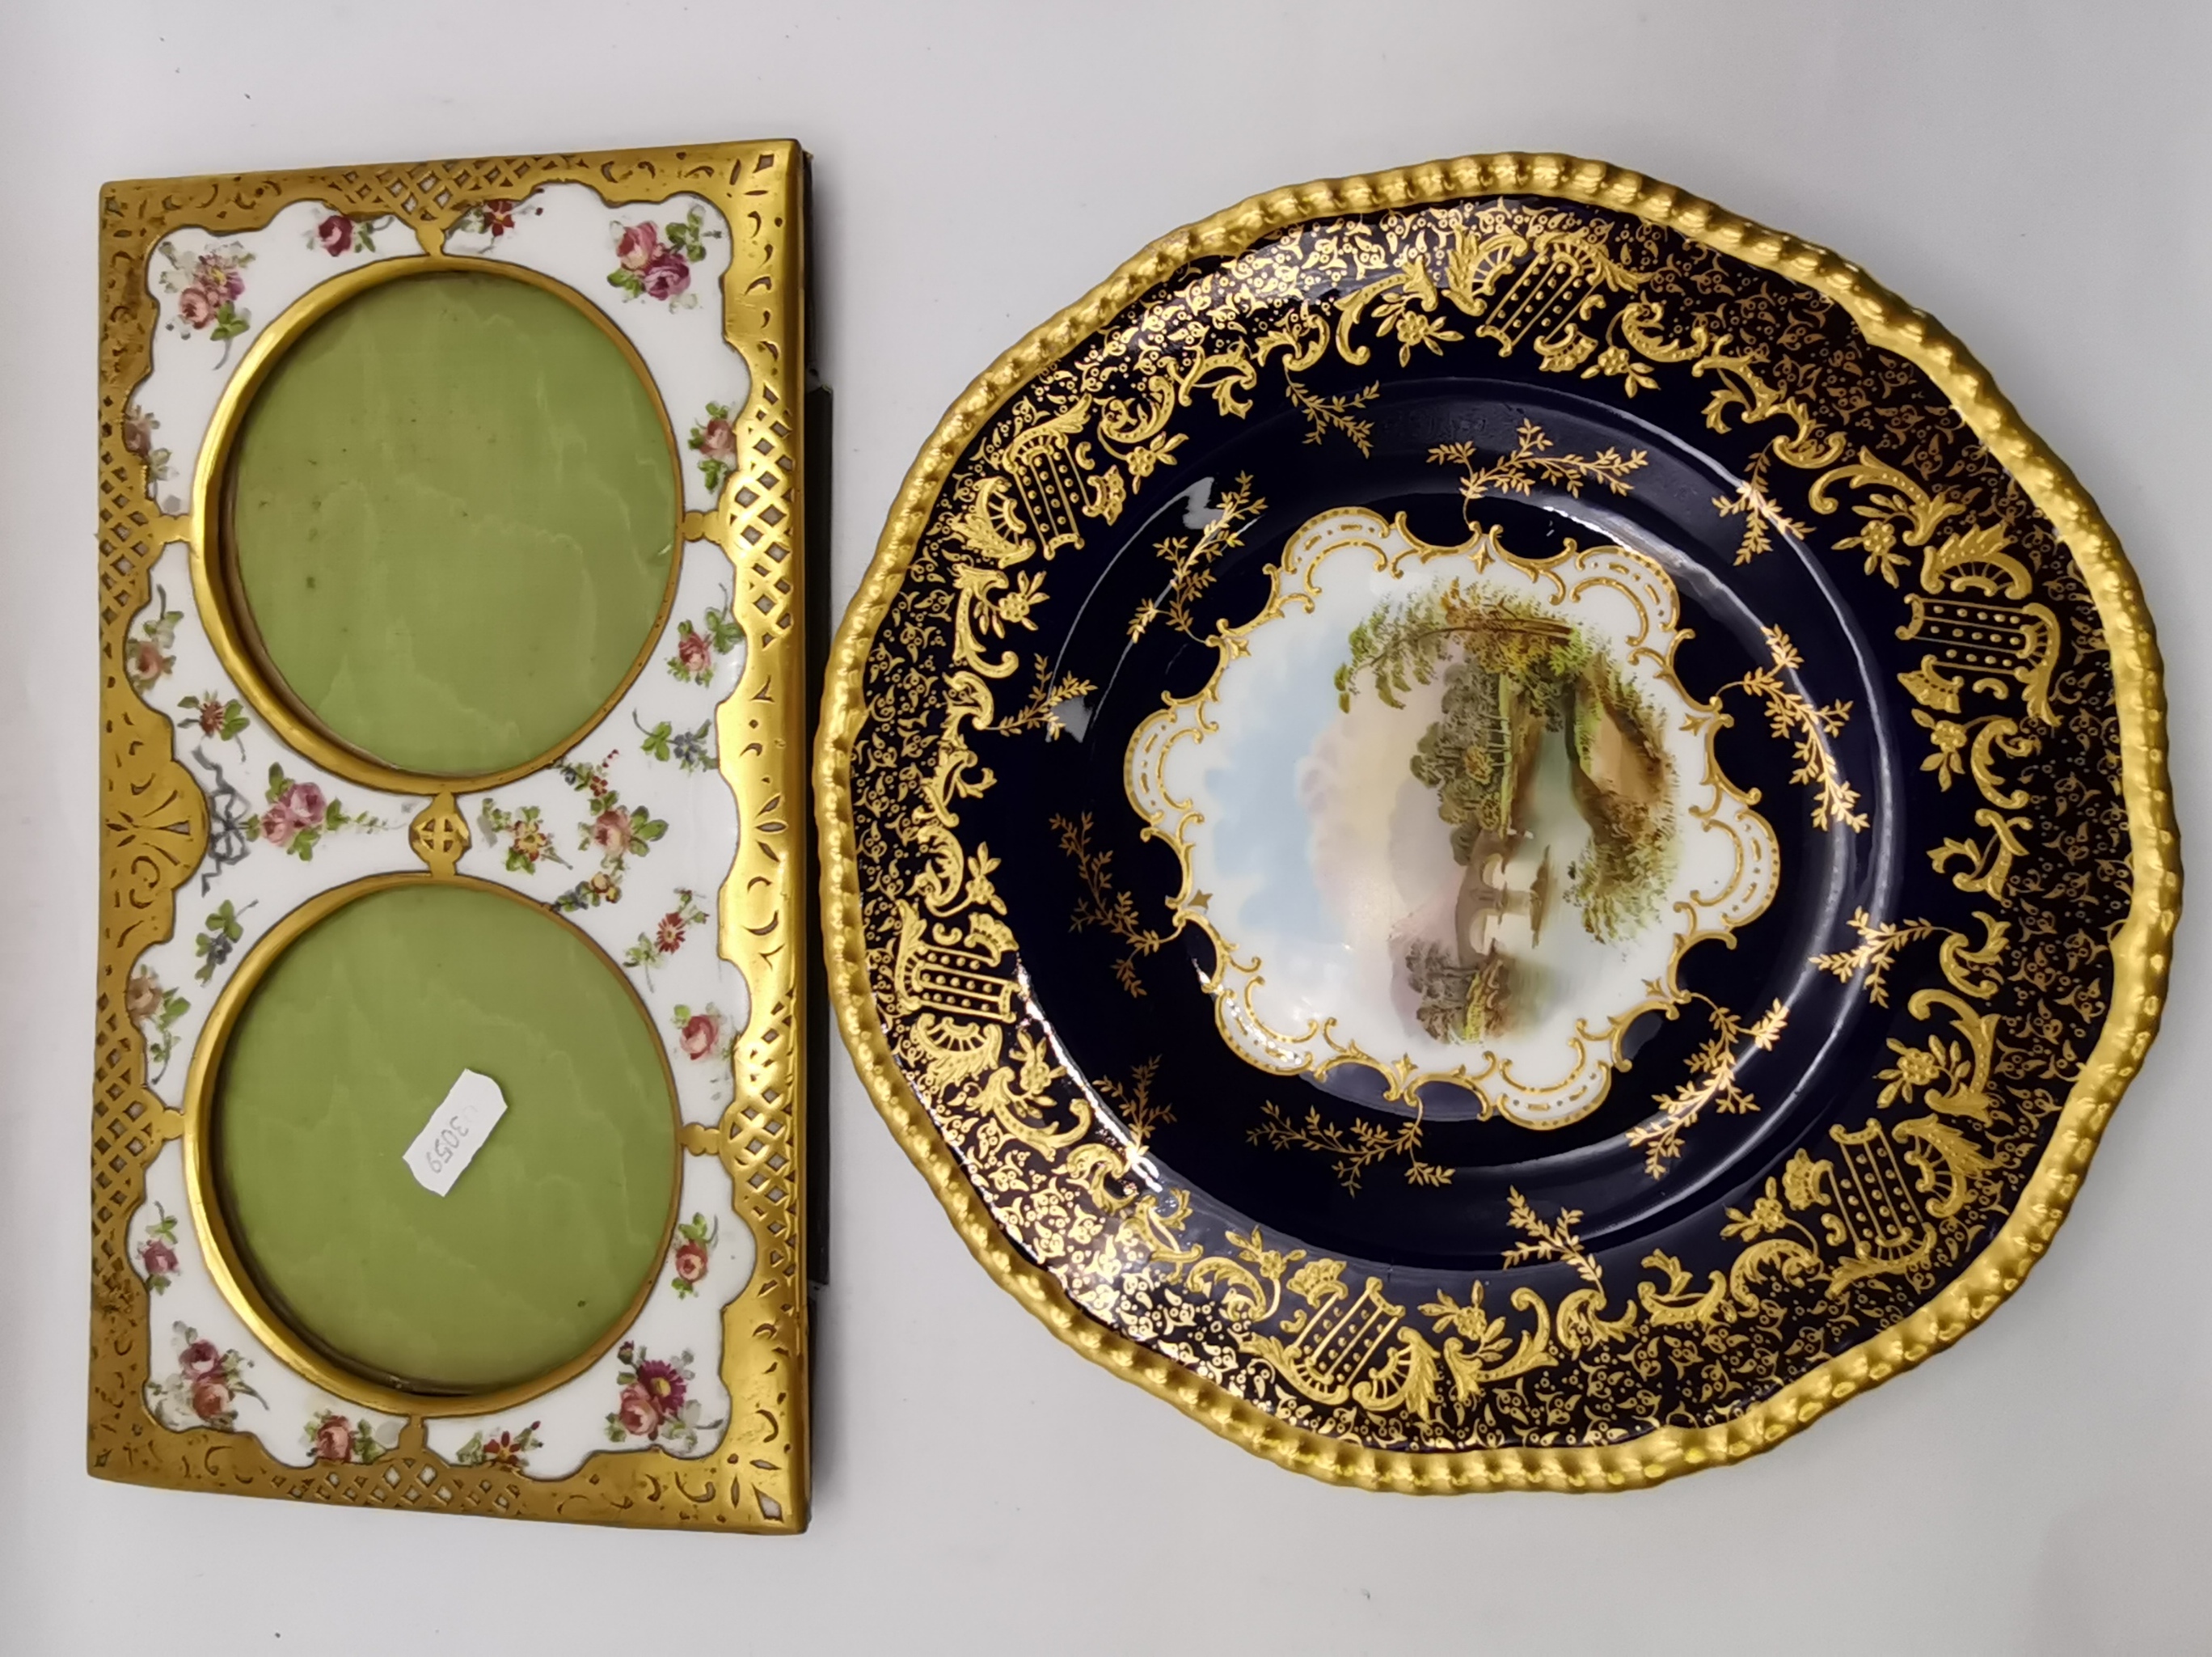 A Coalport cabinet plate, and a French porcelain and gilt-metal twin photograph frame